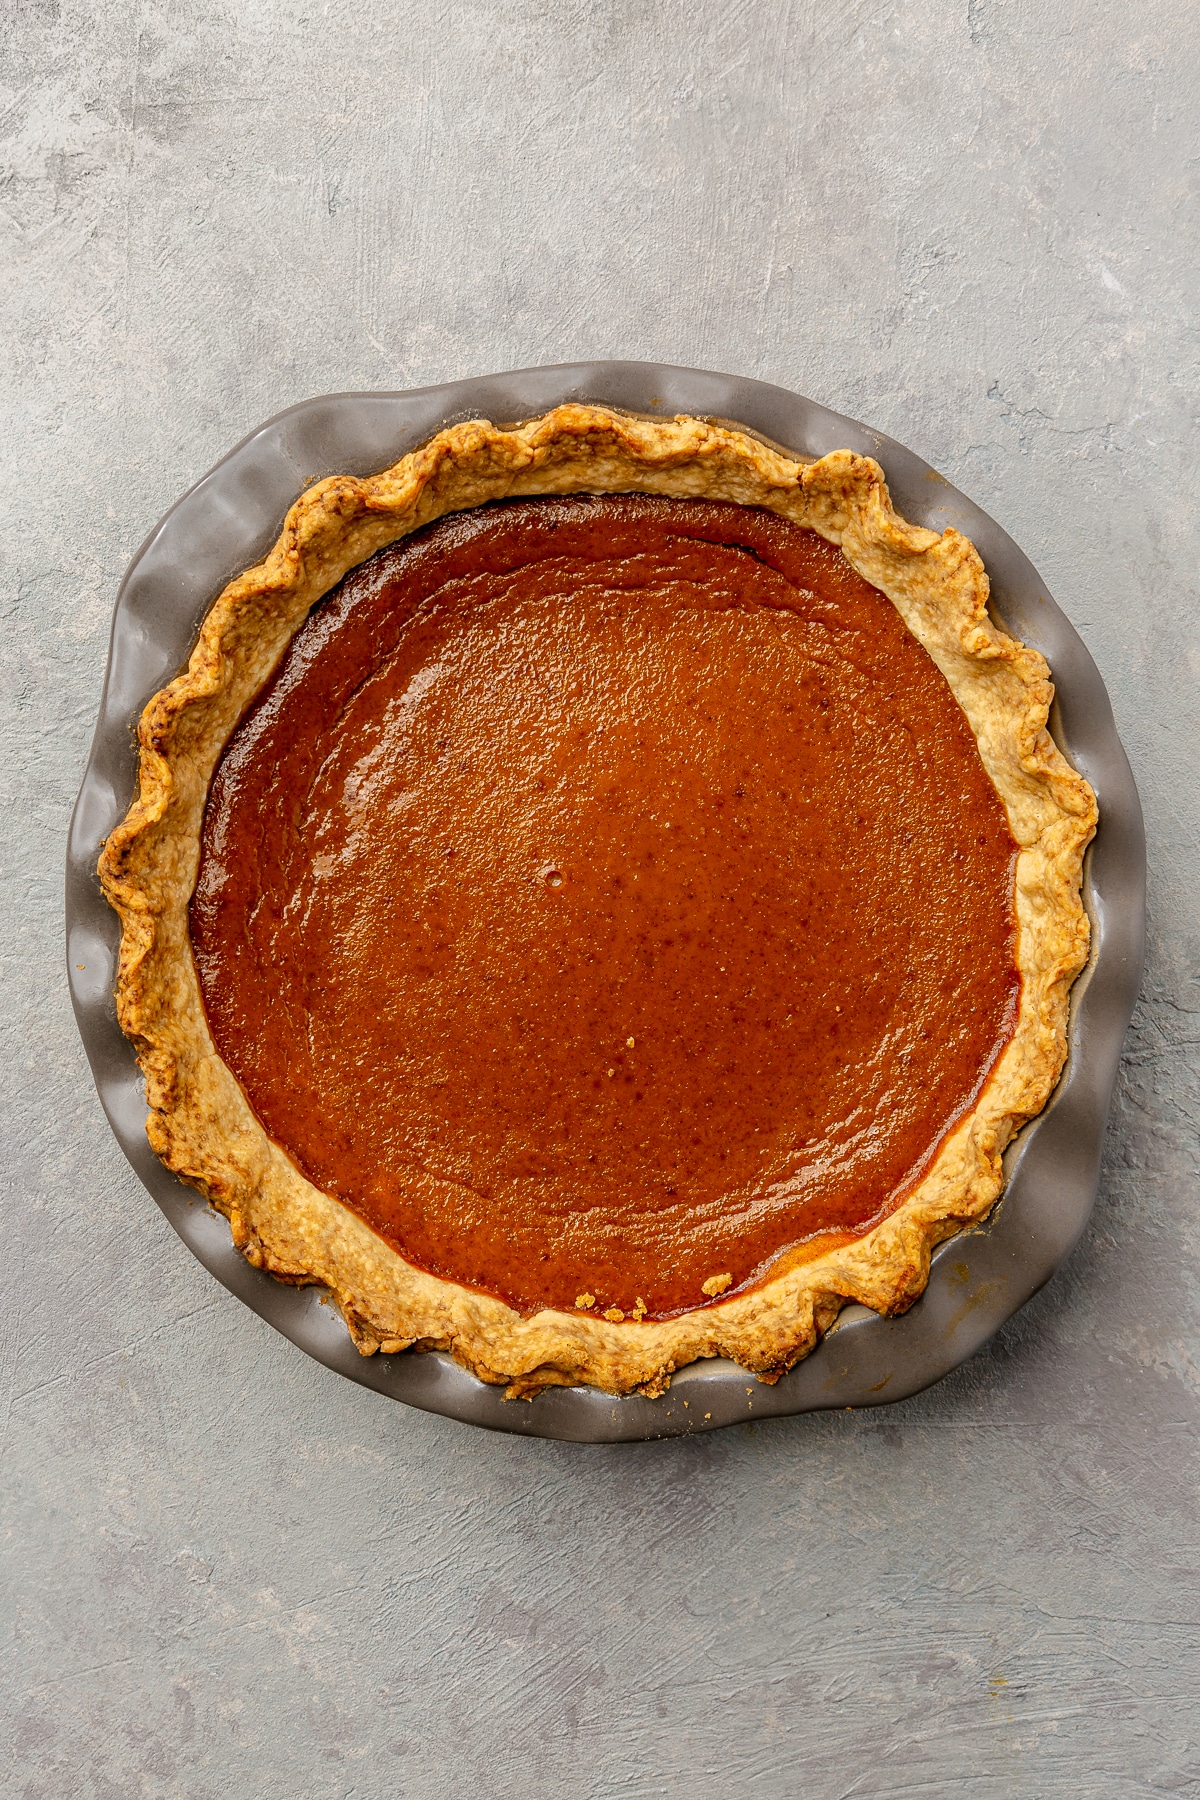 Fully baked pumpkin pie sits in its pie dish on a light grey background.